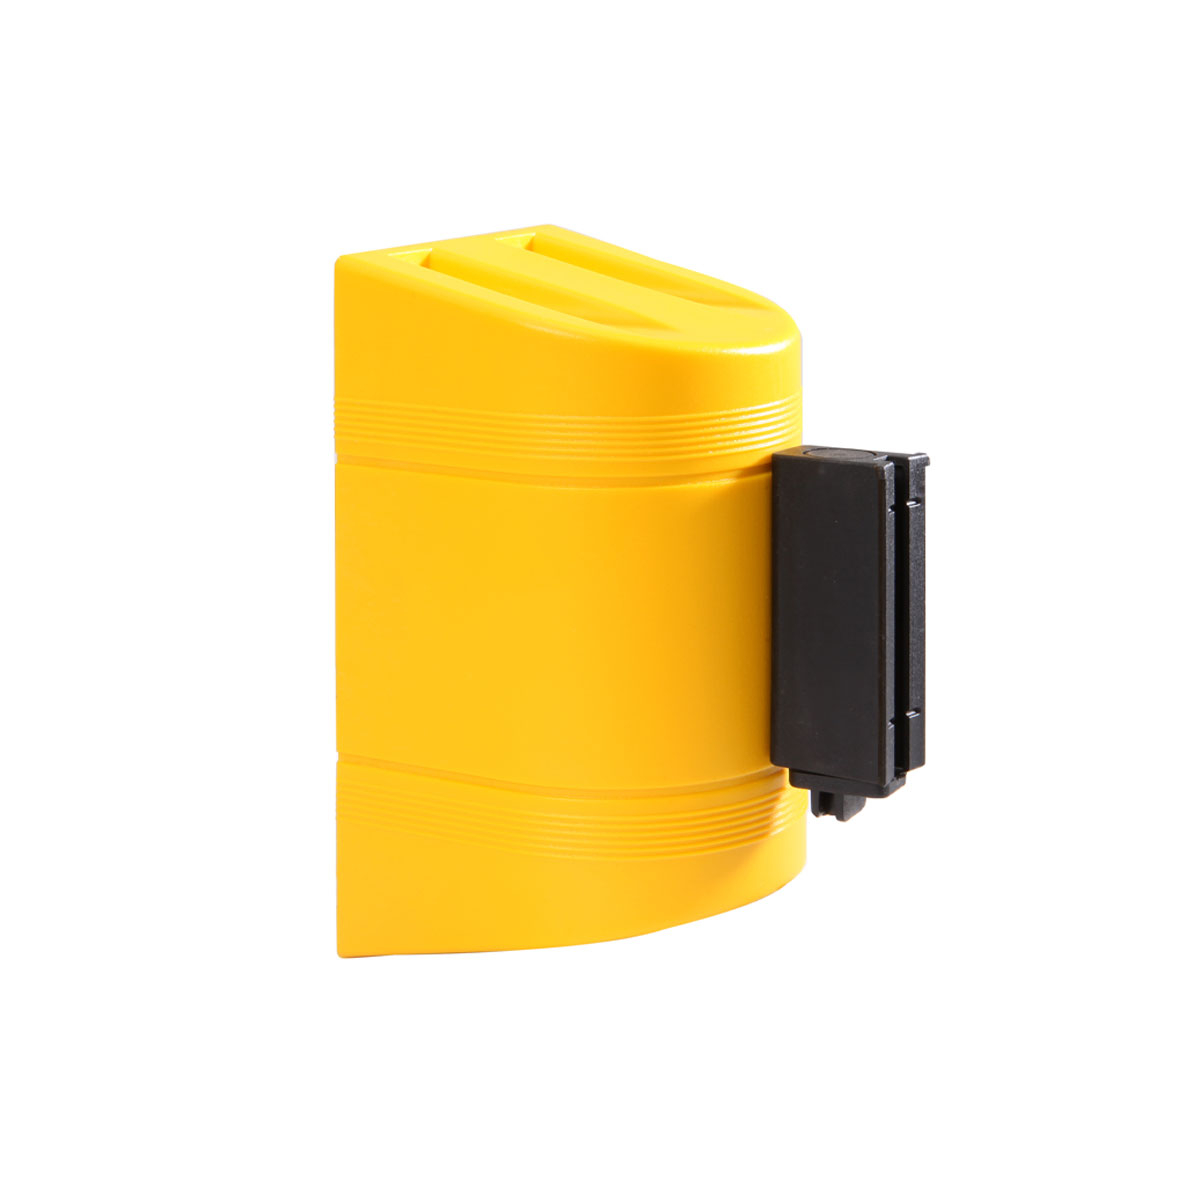 WallPro Mini Wall Mounted Retracting Barriers With 19 High Visibility Webbing Colour Options